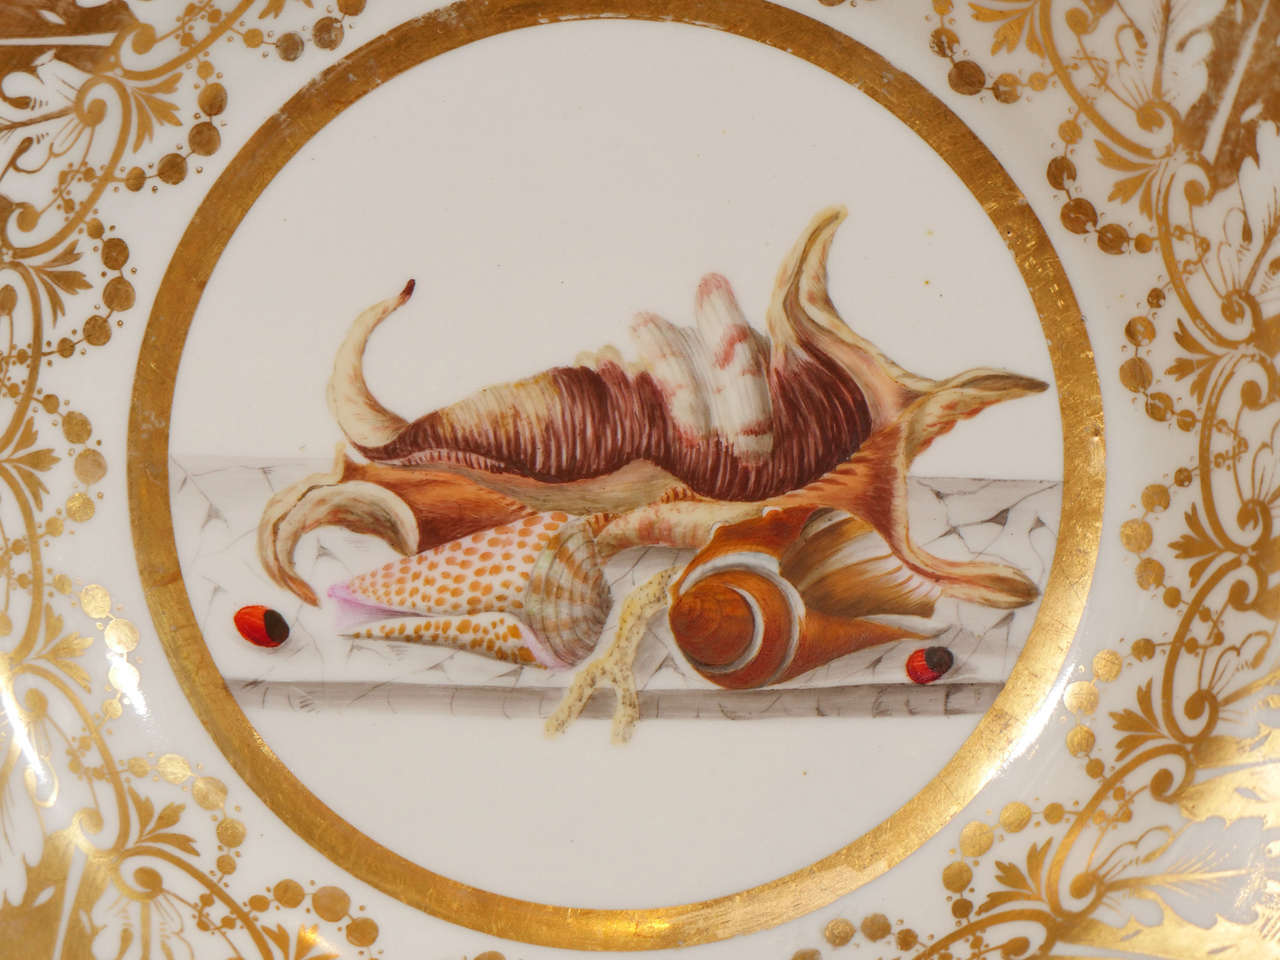 19th Century Pair of English Porcelain Dishes Painted with Shells